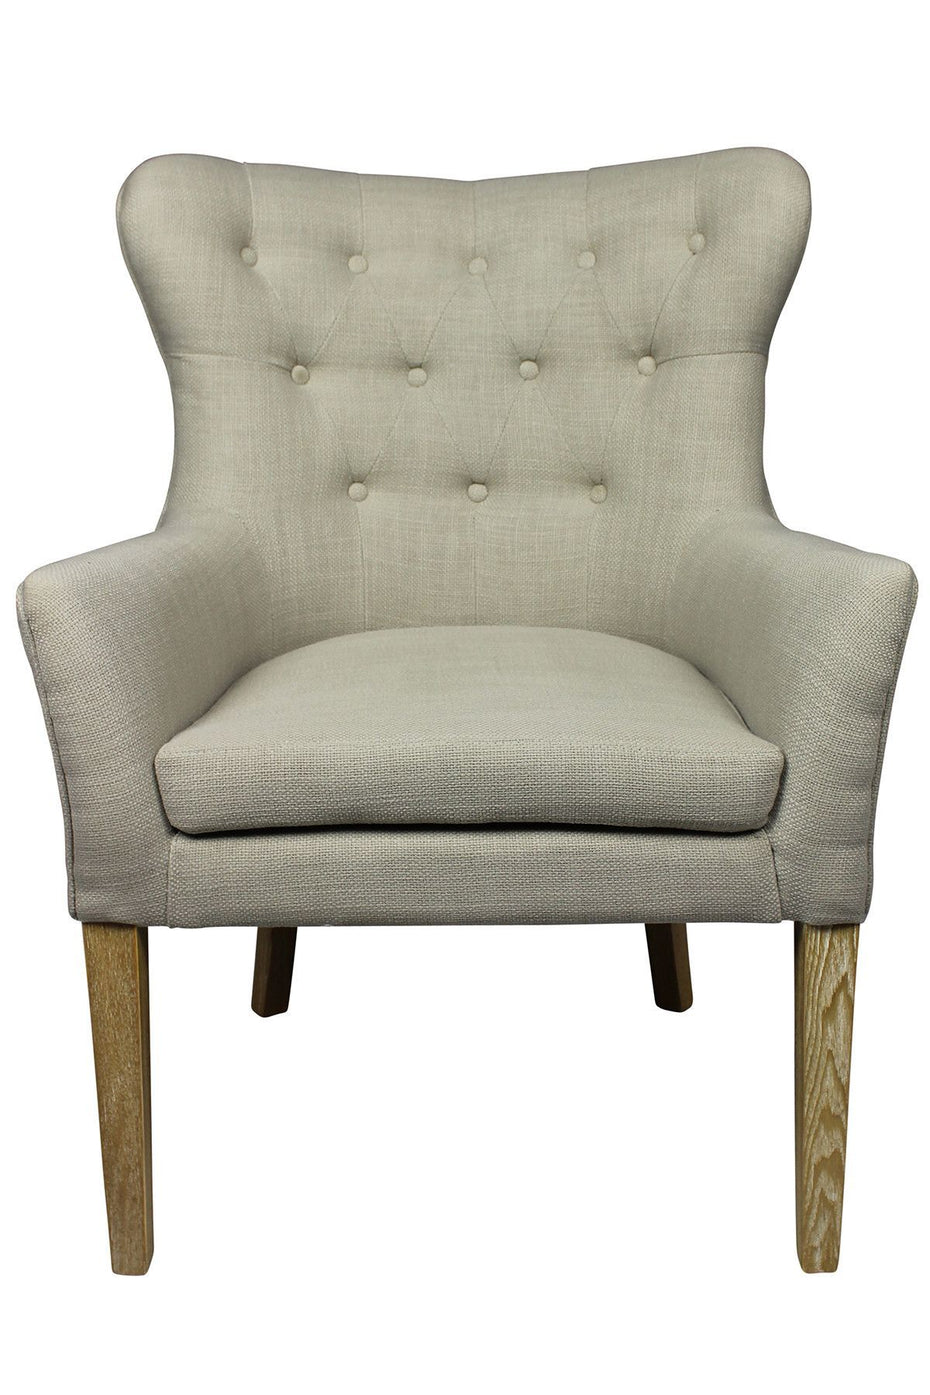 100% Polyester And Natural Tufted Arm Chair 28" - Taupe